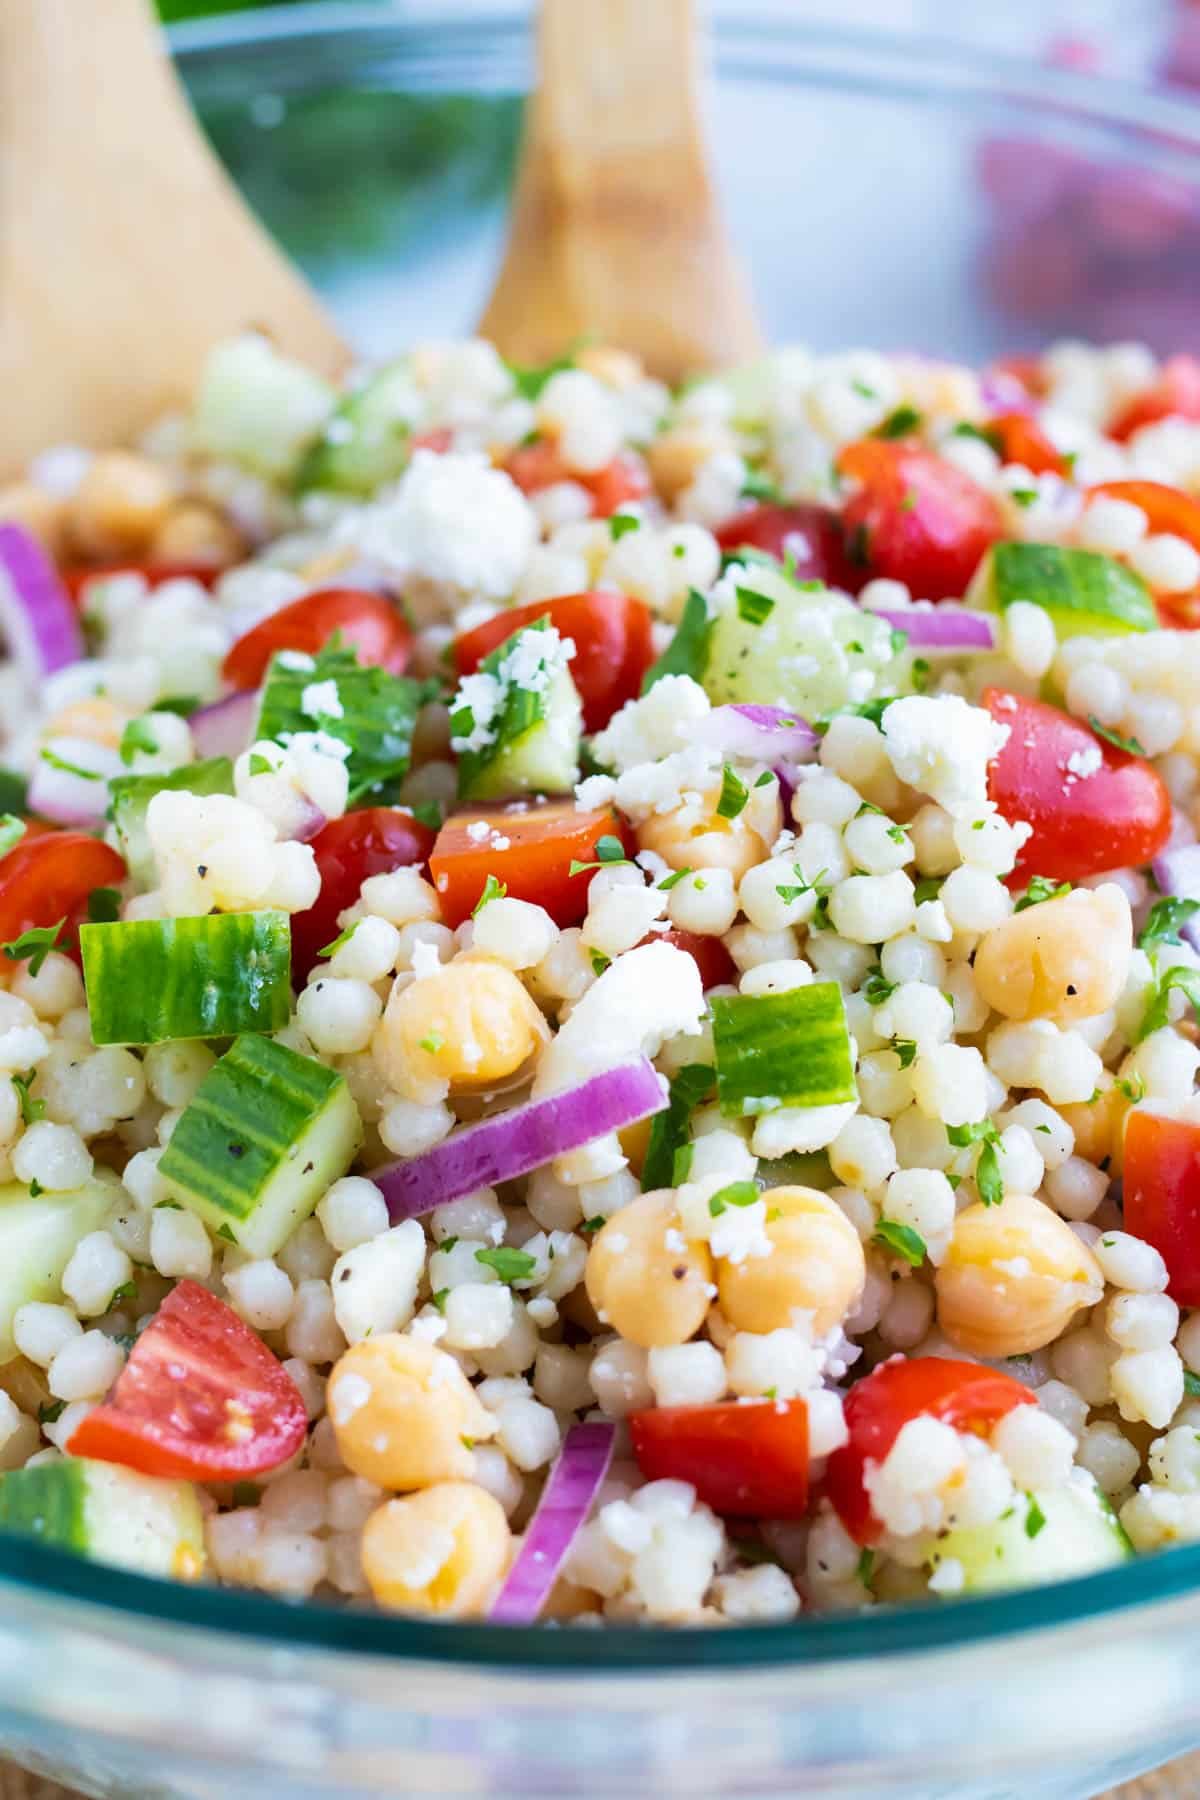 Mediterranean Couscous Salad with Tomatoes with Feta & Tomatoes RECIPE.